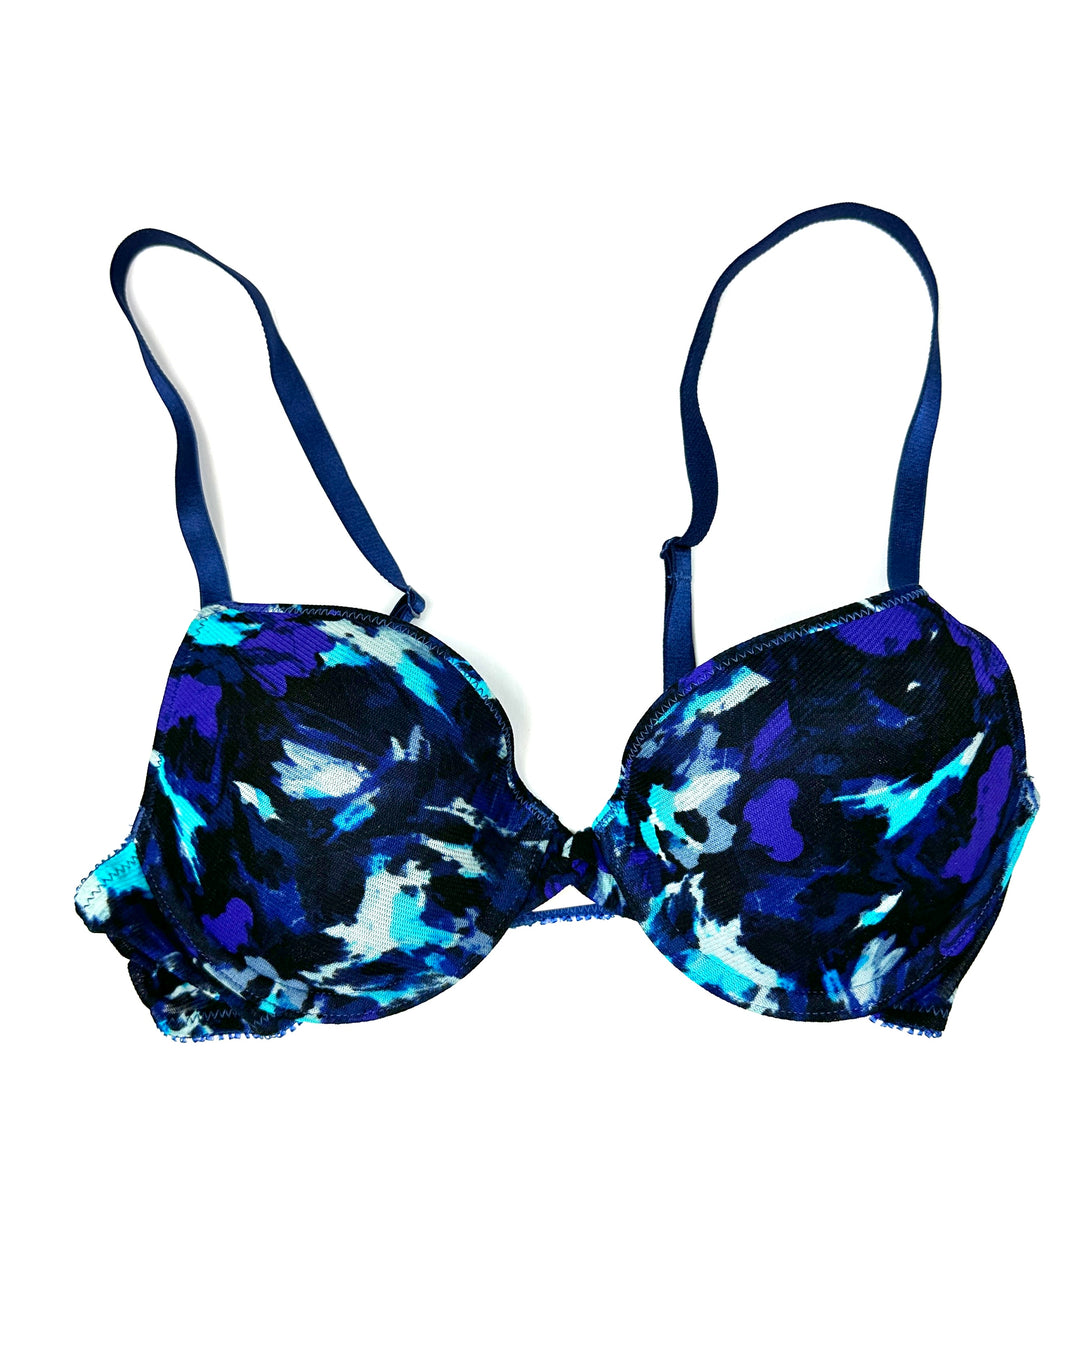 Blue Abstract Pushup Bra - 34B, 34C and 34D